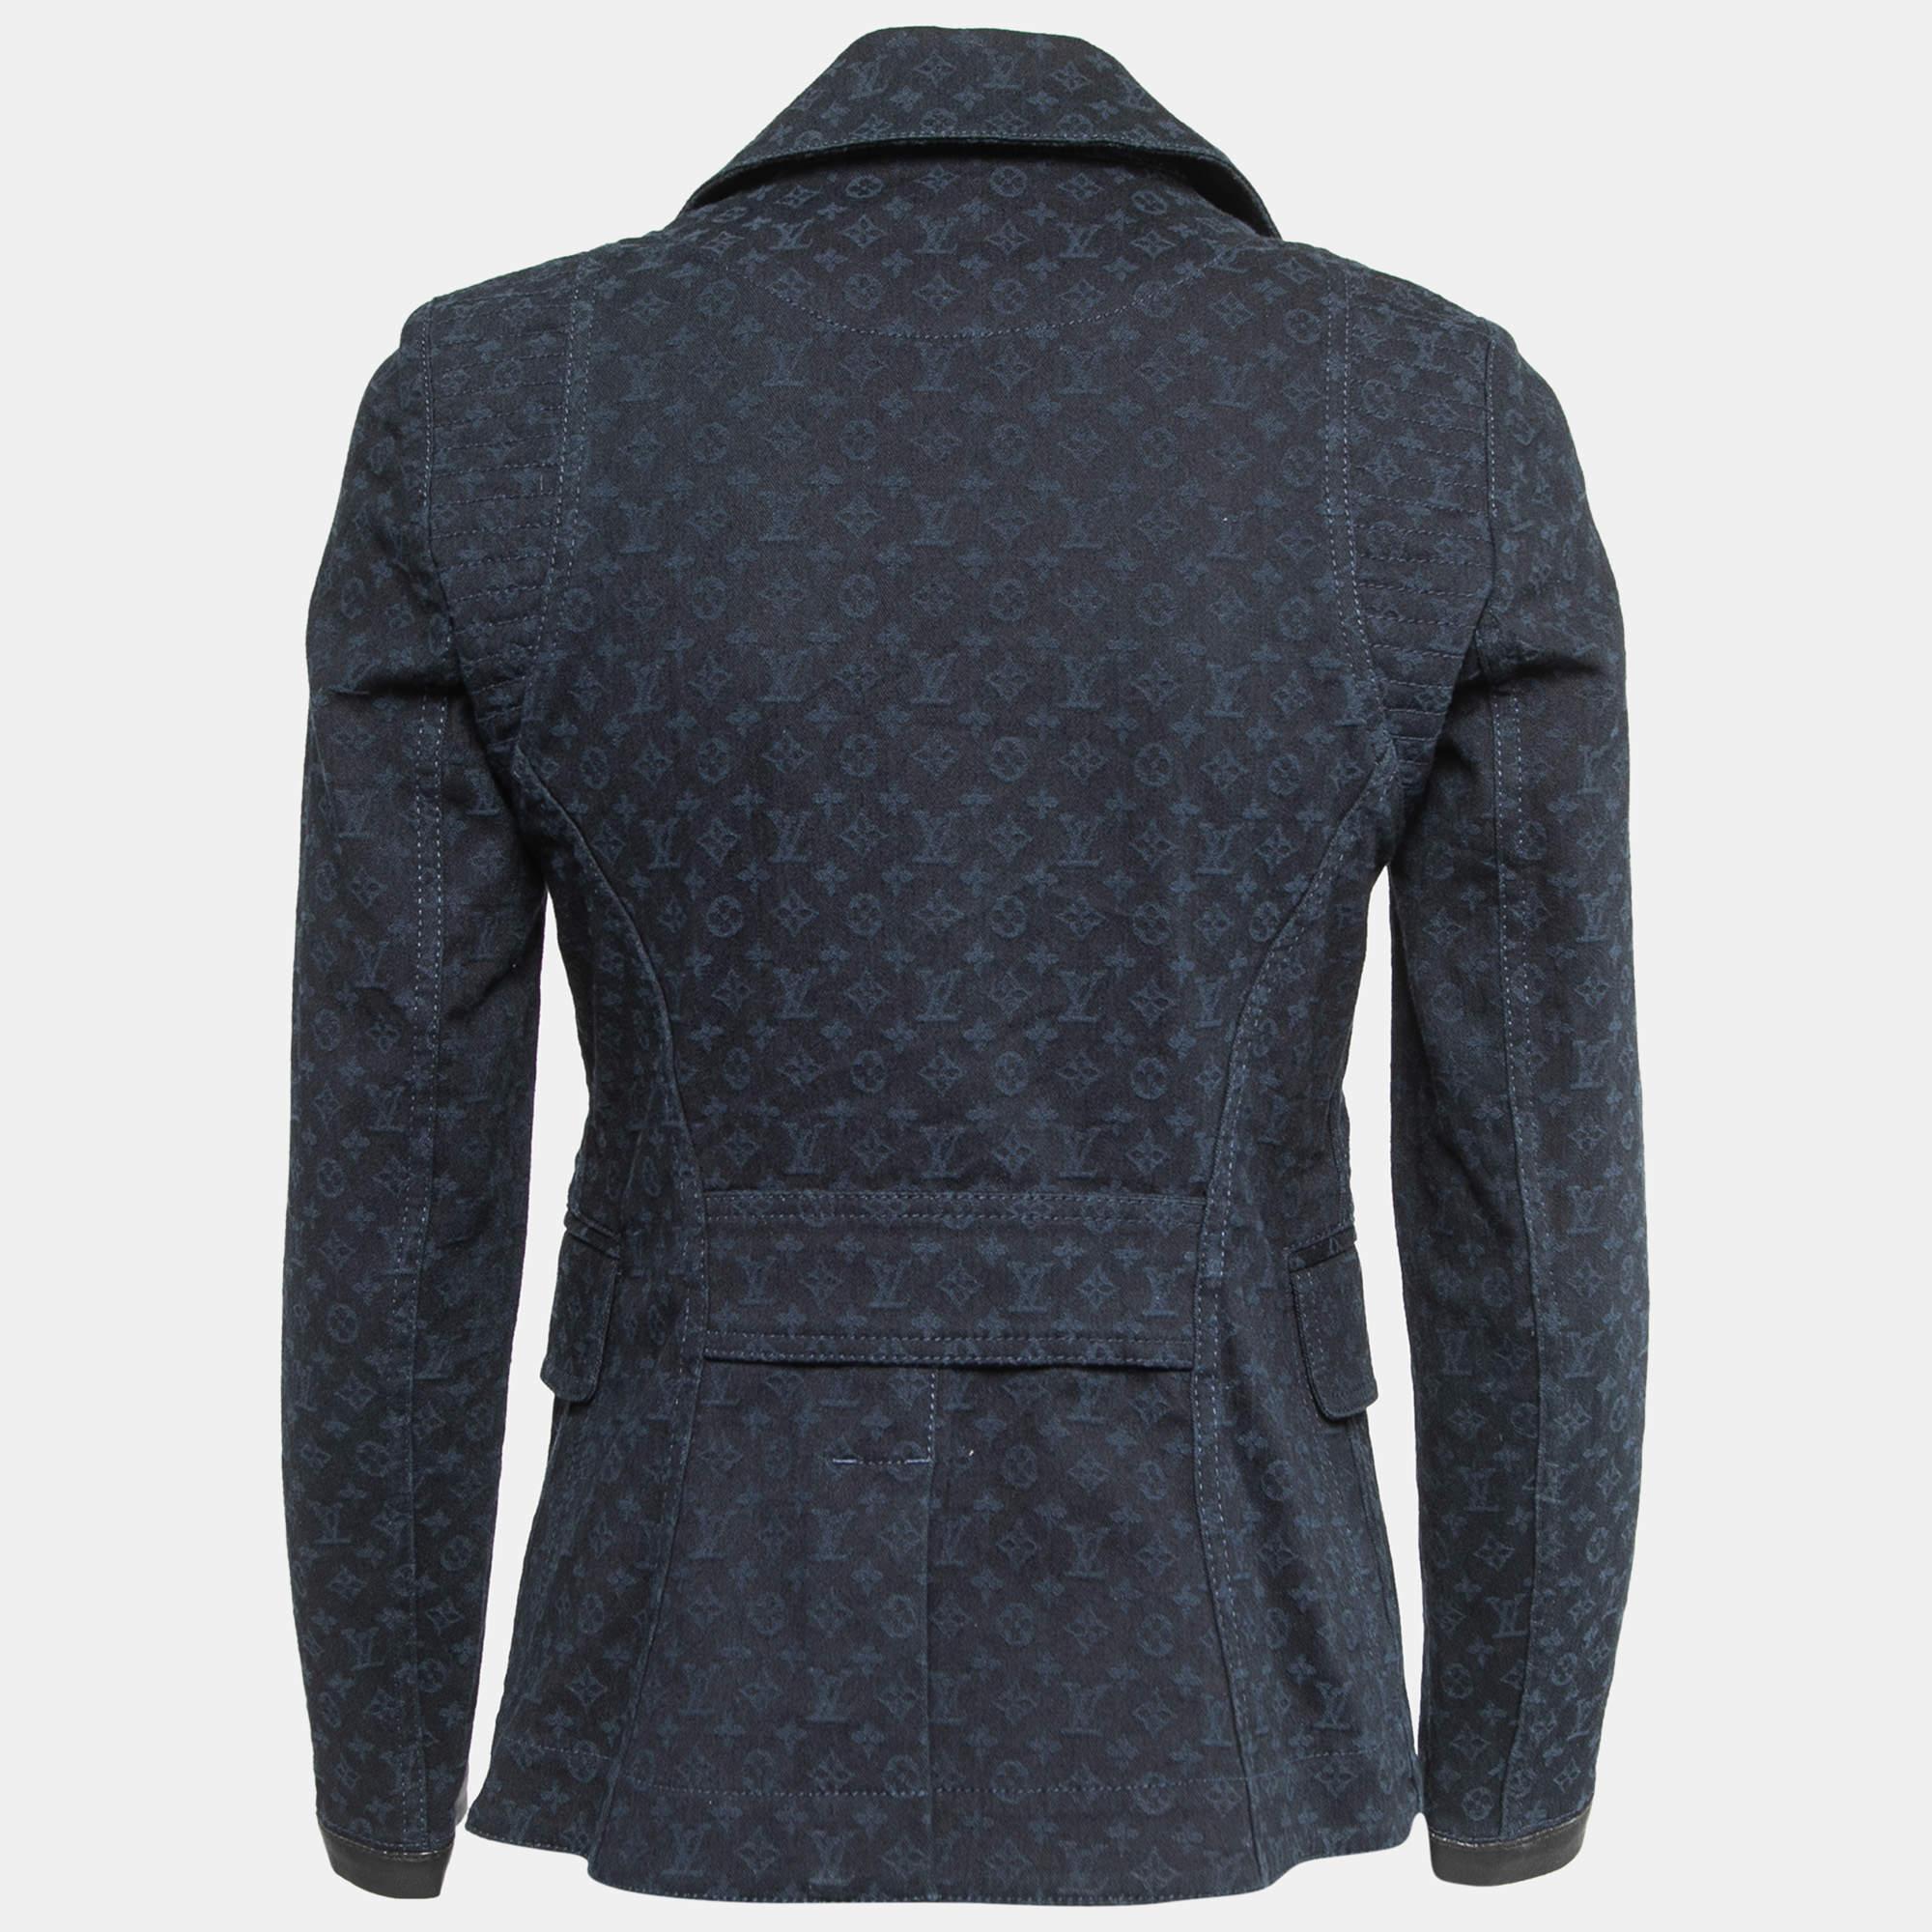 It features a navy blue color with the iconic Louis Vuitton monogram pattern intricately woven into the fabric. The blazer is made from high-quality denim, adding a contemporary touch to the classic design. With its tailored fit and attention to